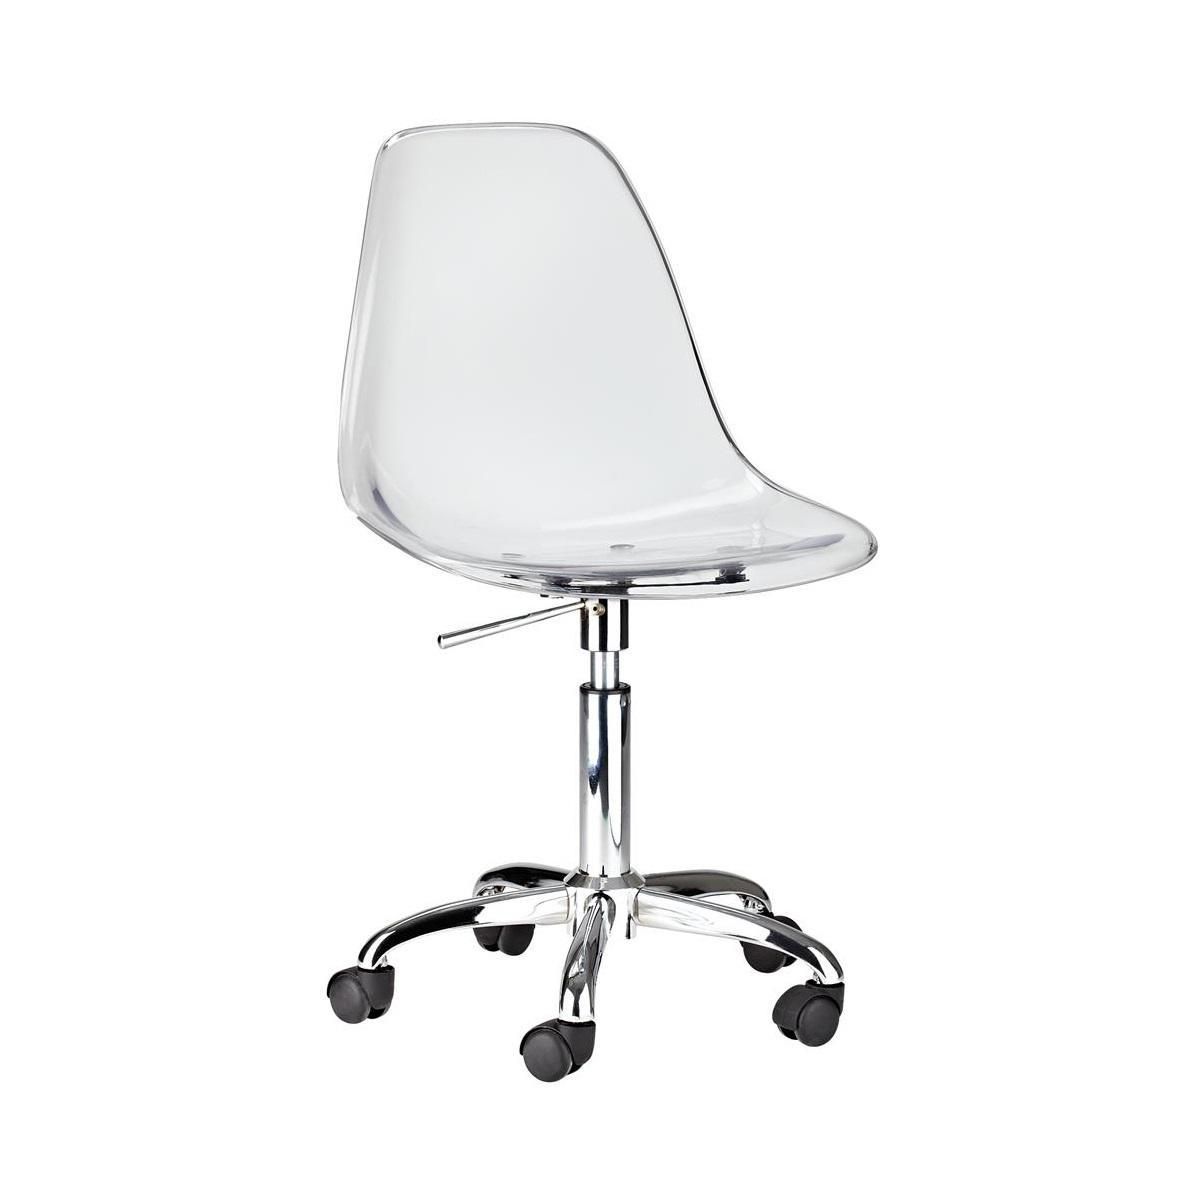 Heavenly Collection Acrylic Office Chair Walmart Canada